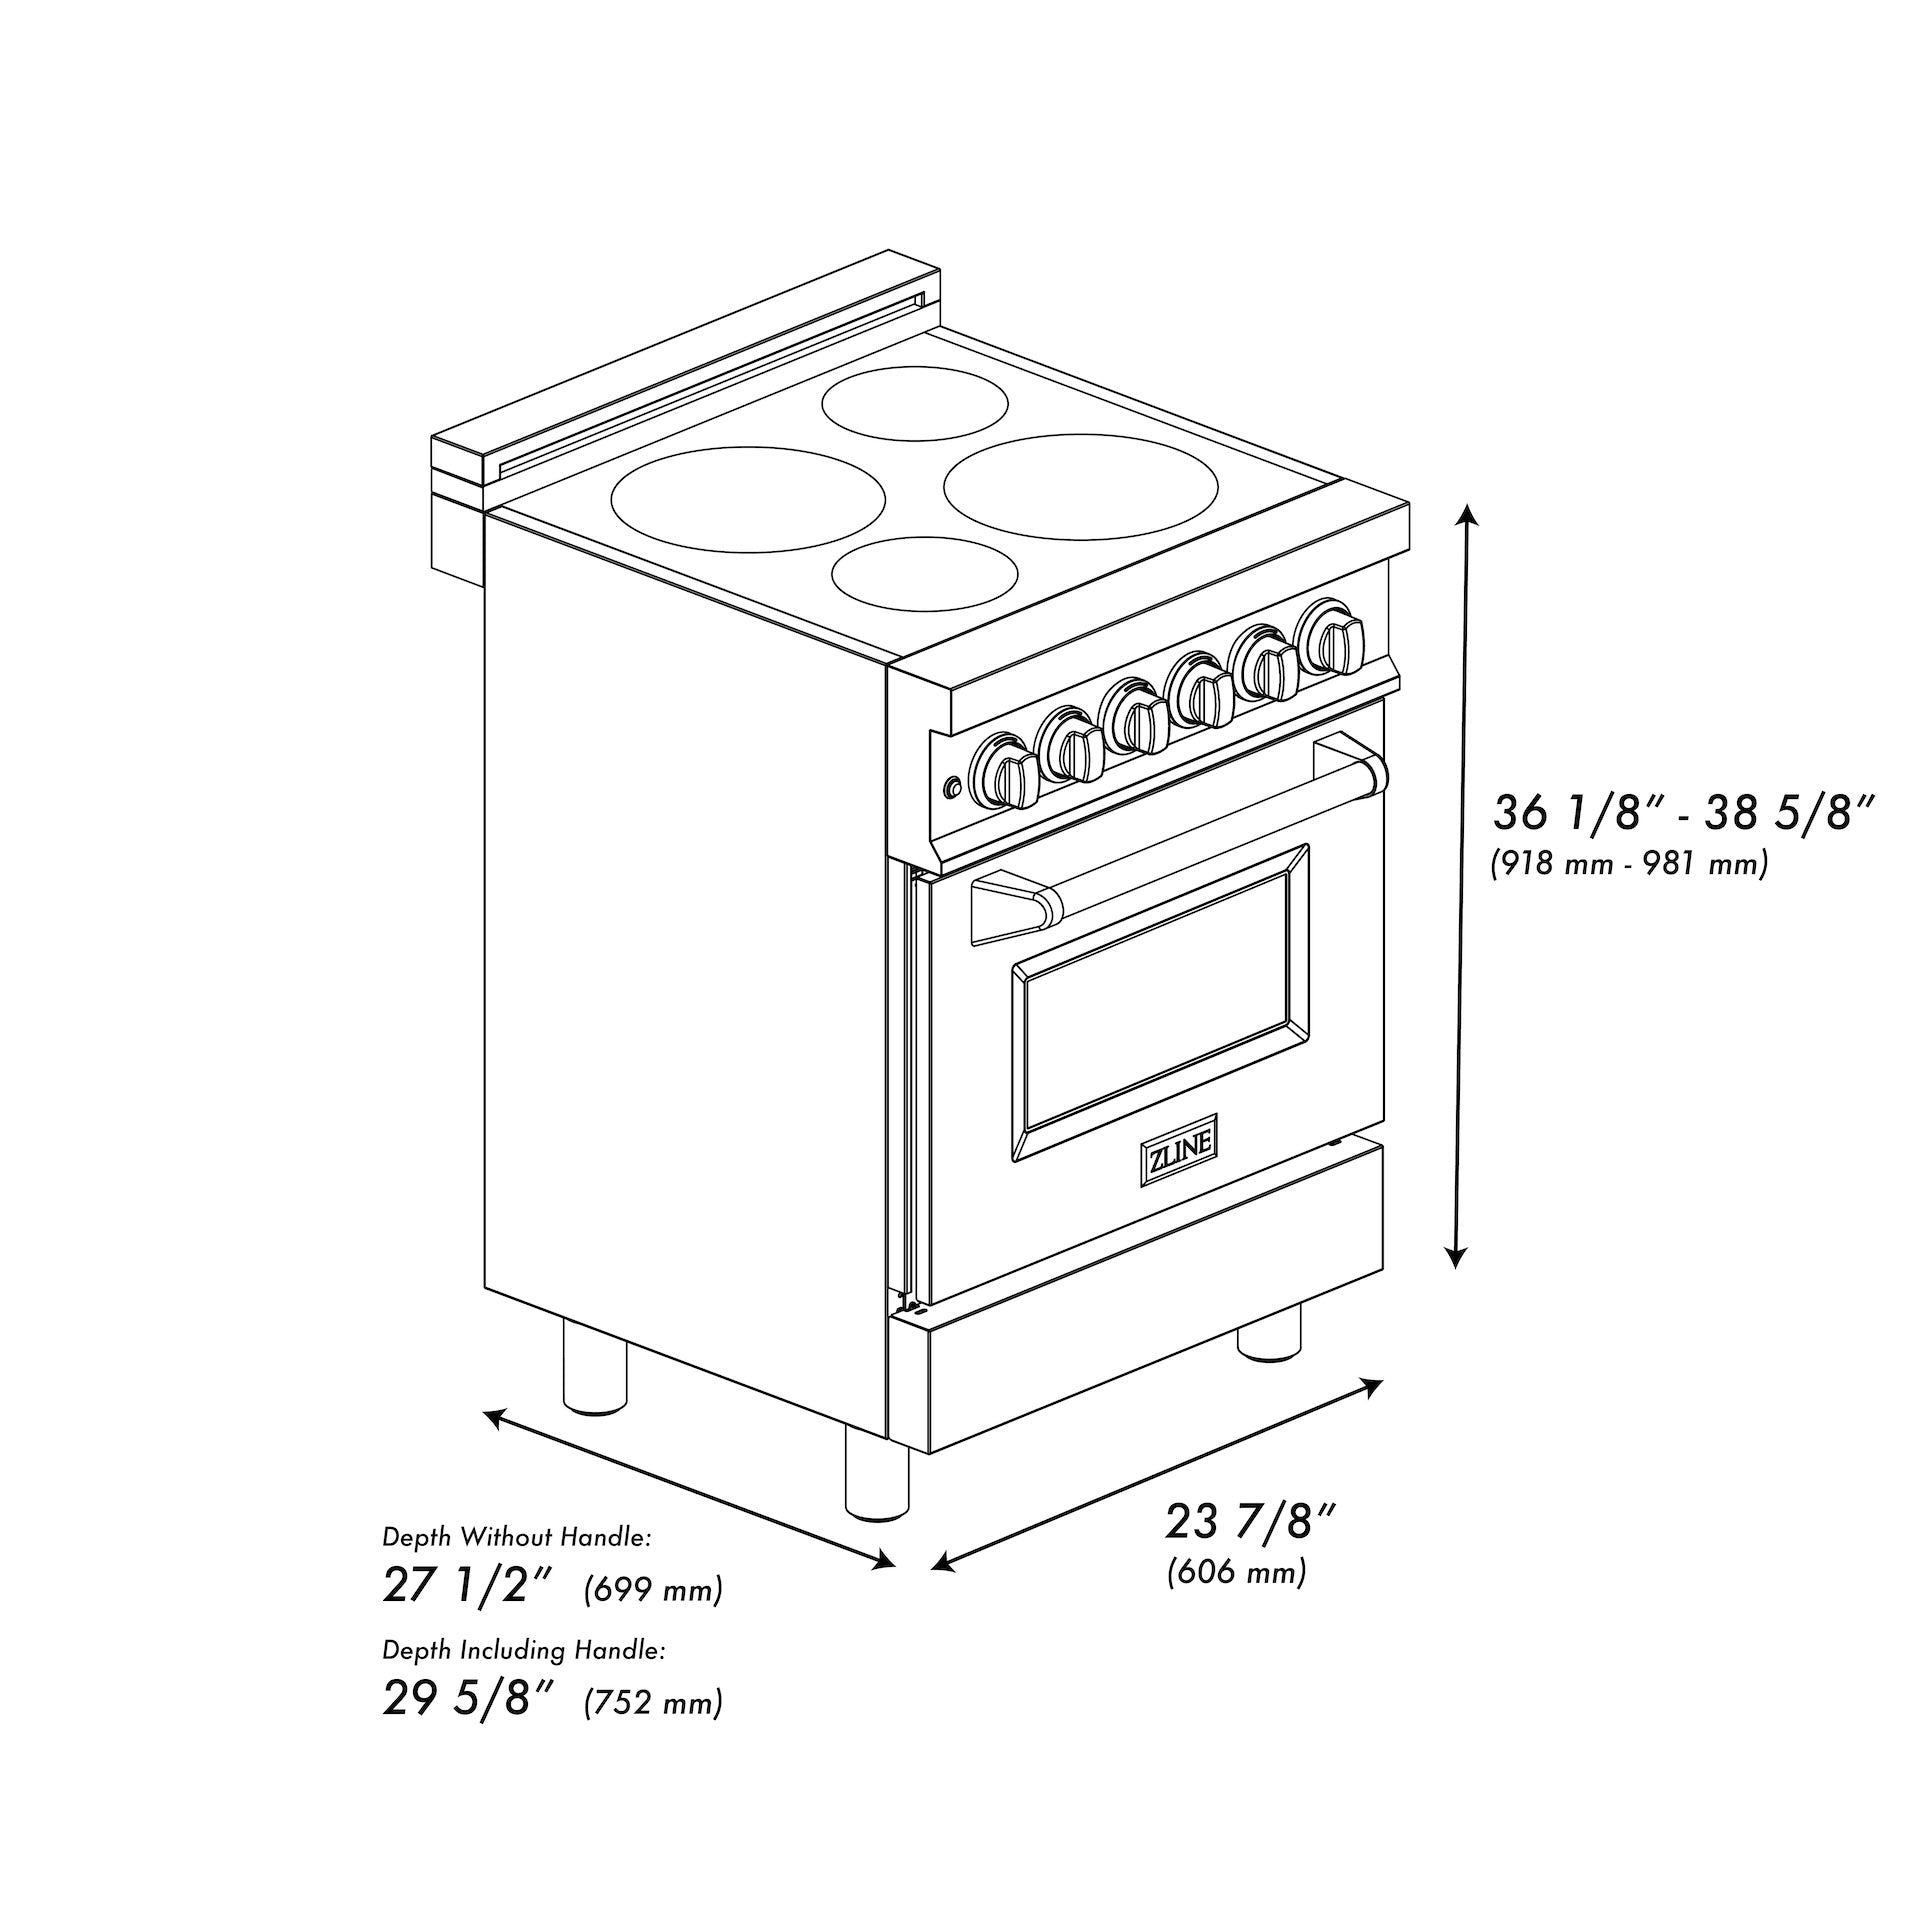 ZLINE 24" 2.8 cu. ft. Induction Range with a 4 Element Stove and Electric Oven in Stainless Steel (RAIND-24)